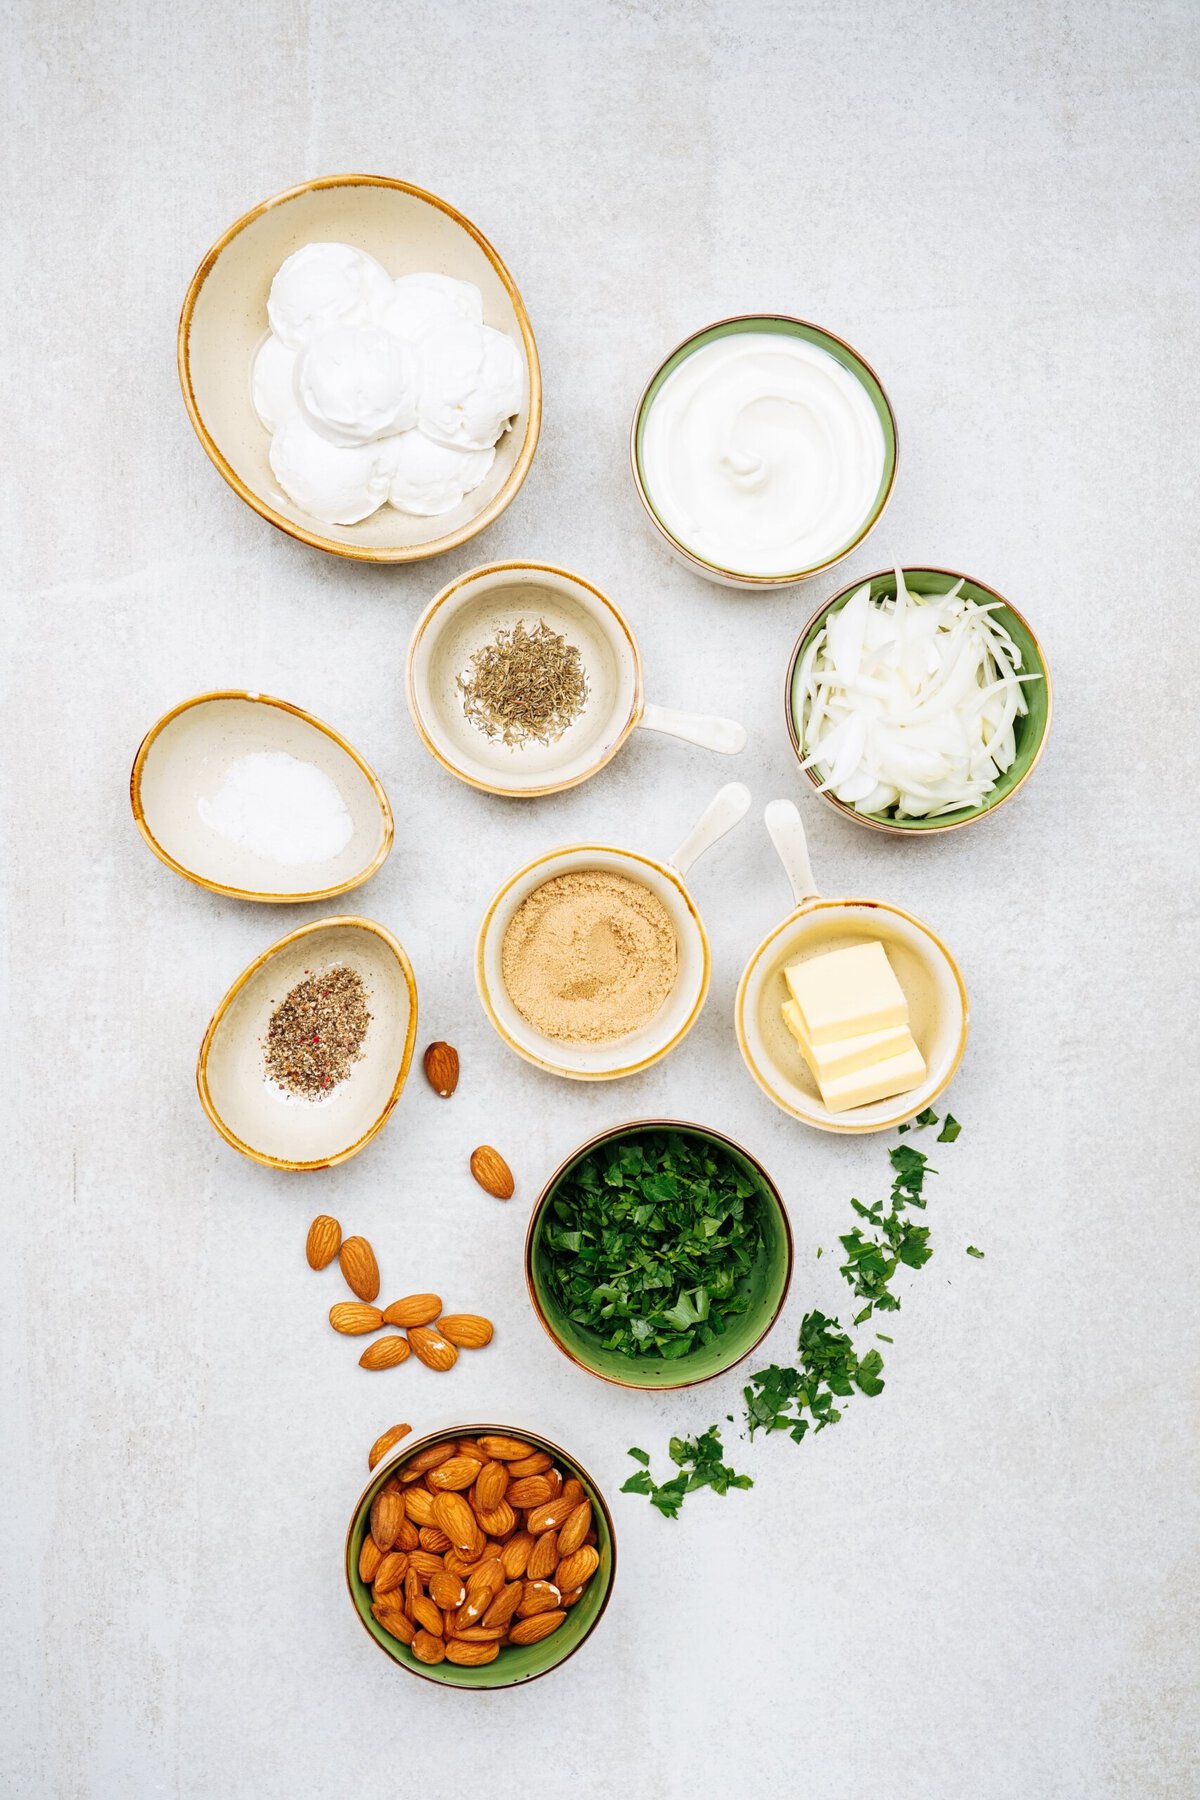 Overhead view of various ingredients in small bowls, including sour cream, yogurt, butter, ground spices, chopped herbs, onions, whole almonds, and salt. Nearby, a plate of goat cheese balls adds a touch of sophistication to the array.